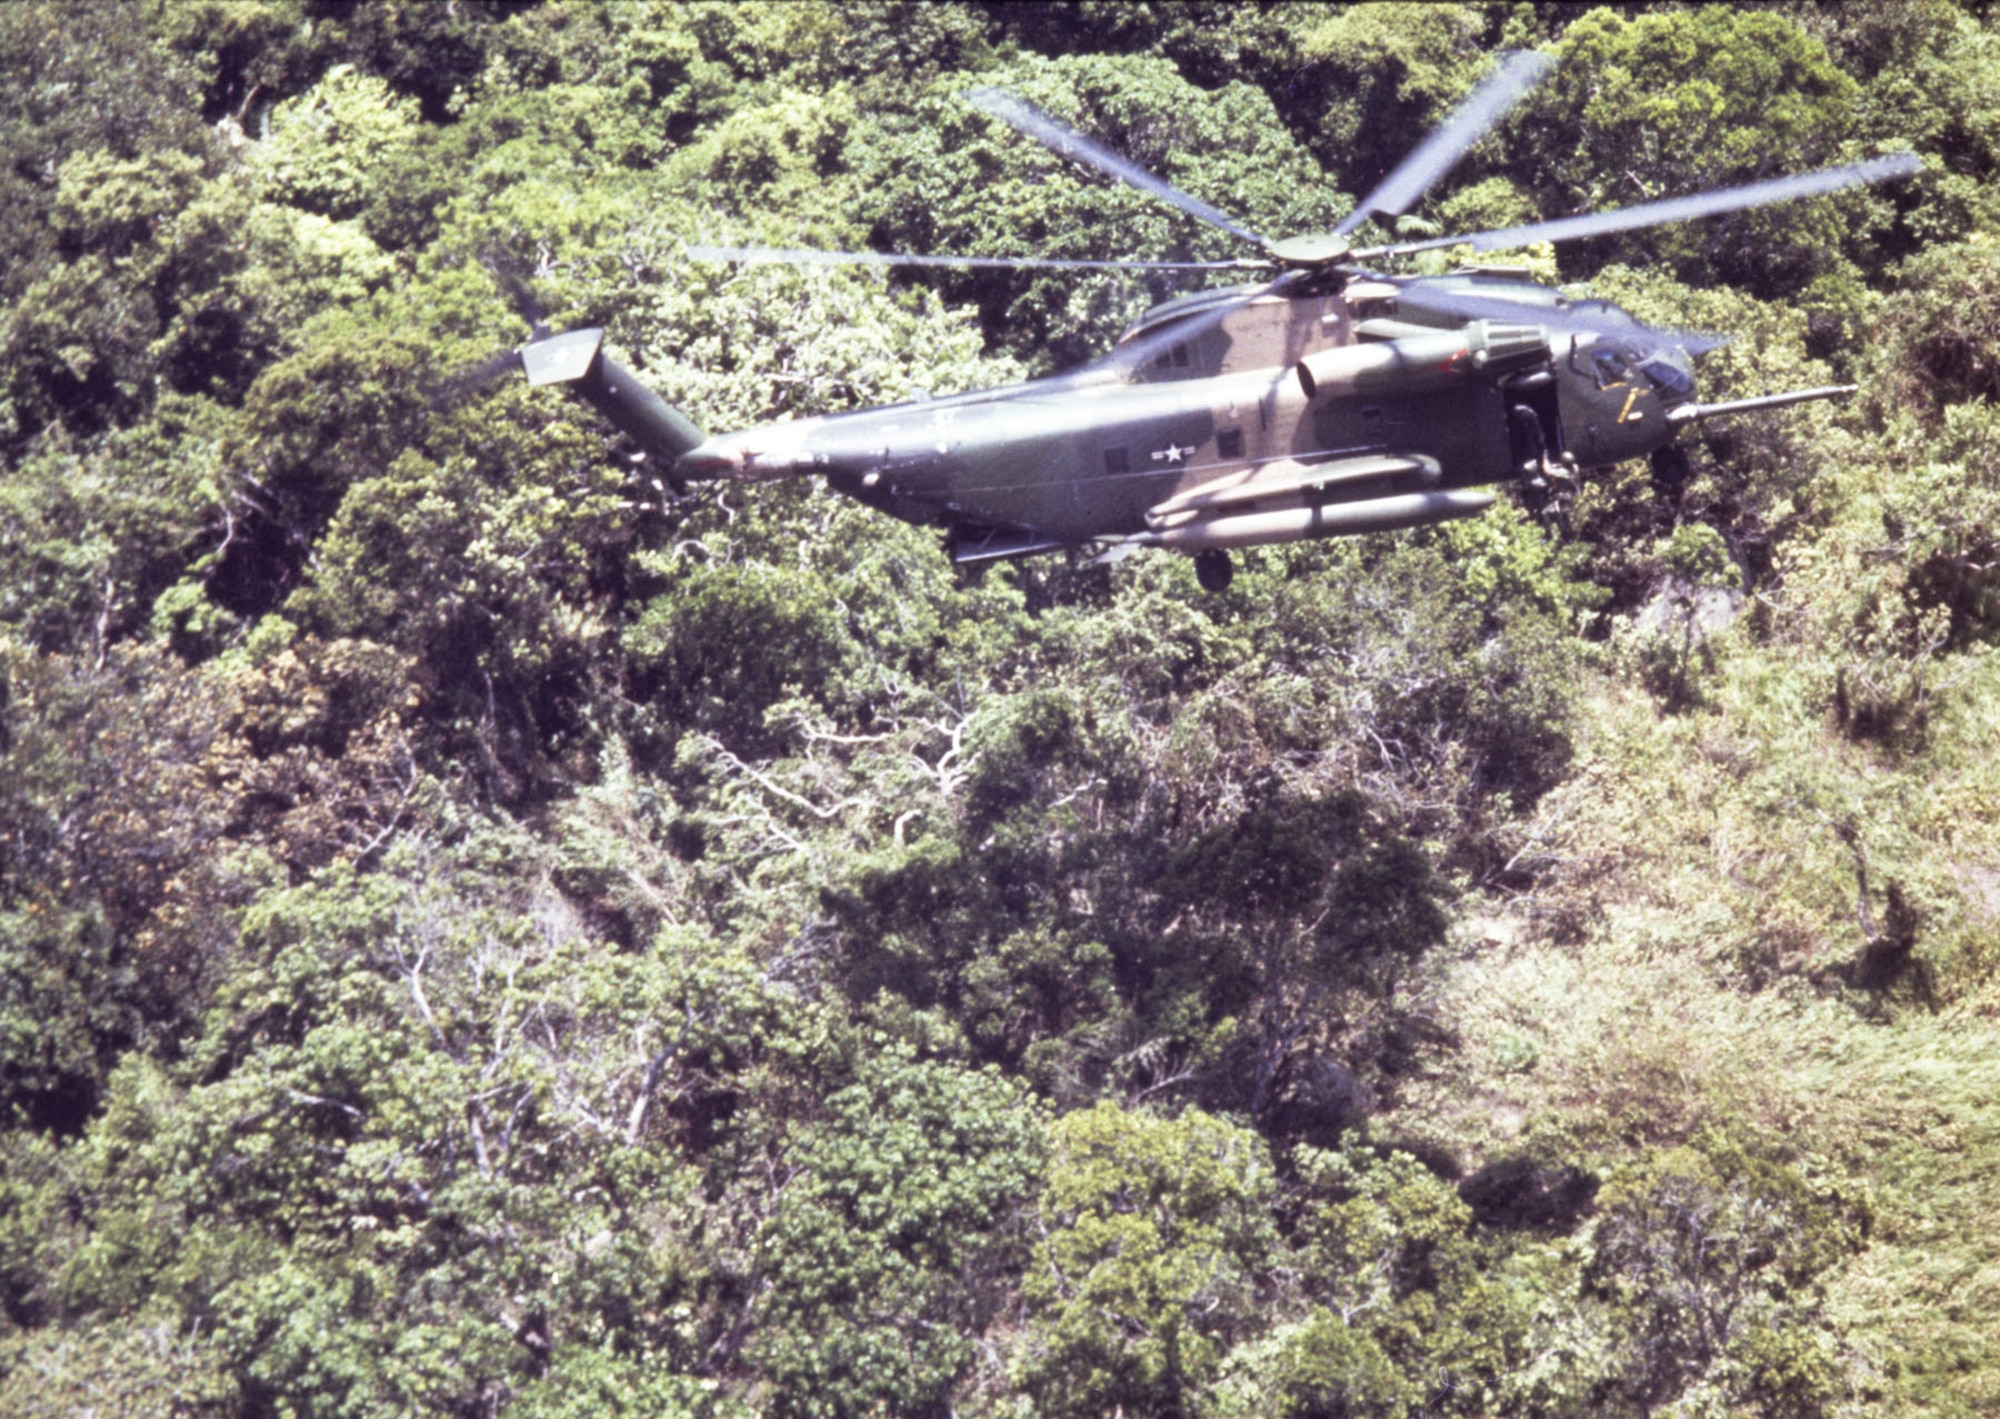 A hovering 37th Aerospace Rescue and Recovery Squadron HH-53 helicopter lowers a U.S. Air Force pararescueman during a rescue mission in Southeast Asia, June 1970. (U.S. Air Force photo)